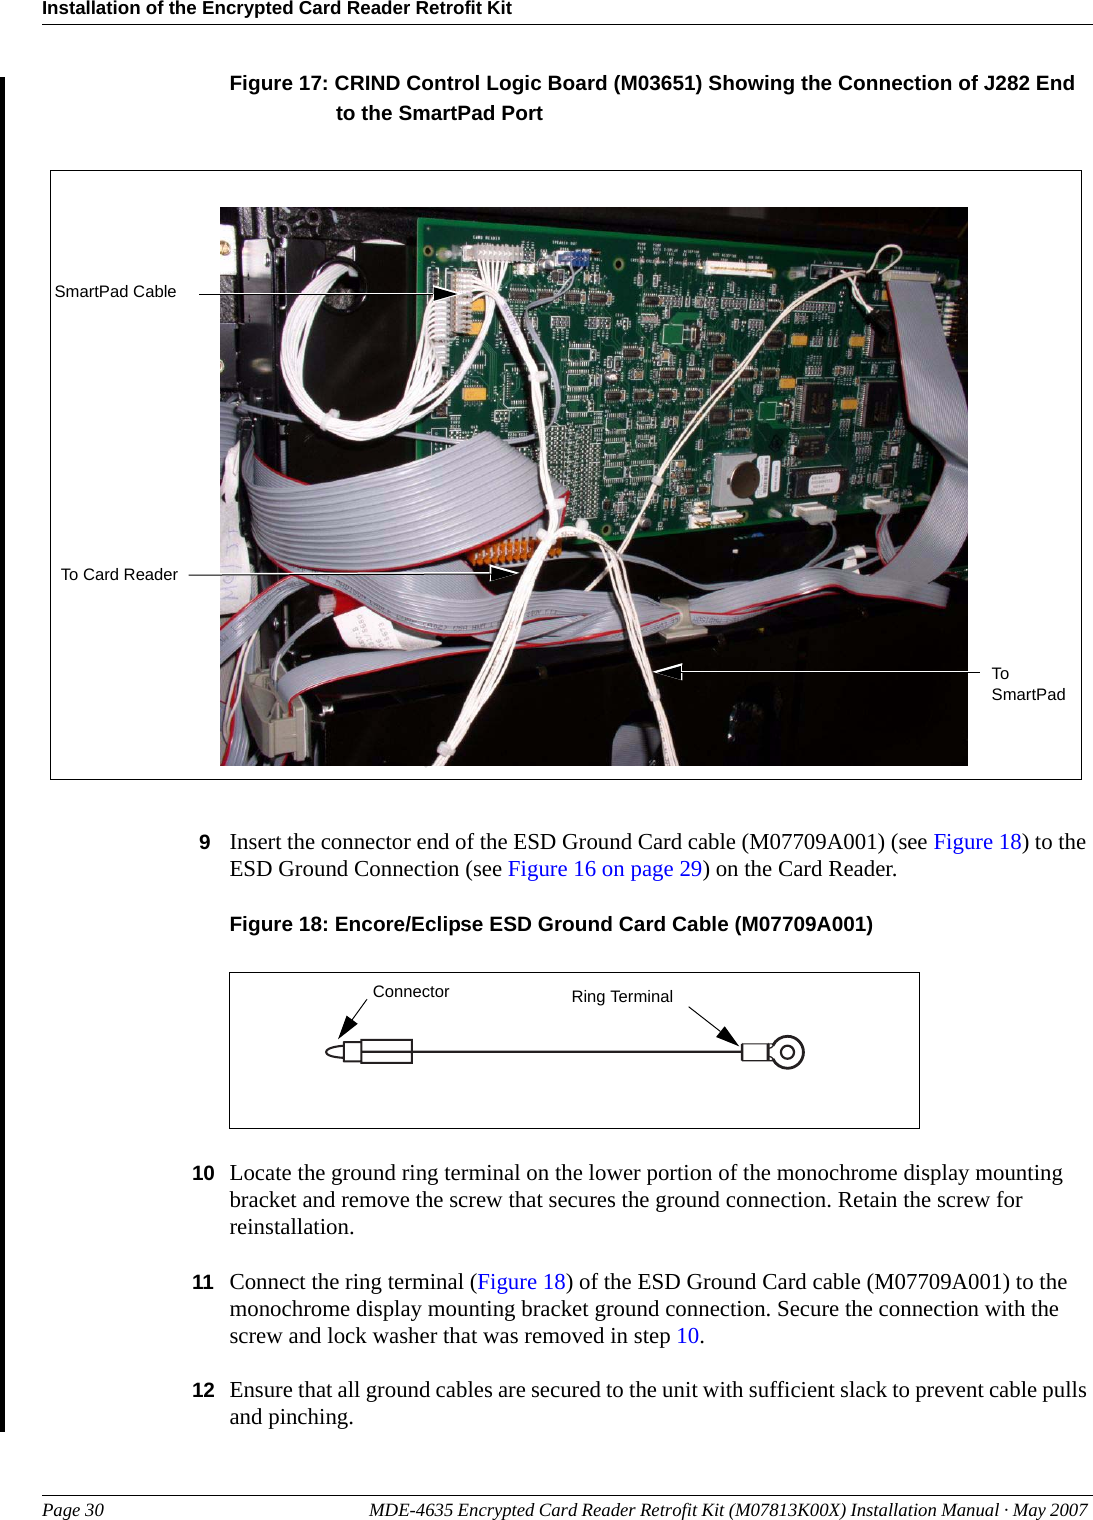 Installation of the Encrypted Card Reader Retrofit KitPage 30 MDE-4635 Encrypted Card Reader Retrofit Kit (M07813K00X) Installation Manual · May 2007 PreliminaryFigure 17: CRIND Control Logic Board (M03651) Showing the Connection of J282 End to the SmartPad PortSmartPad CableTo Card ReaderTo SmartPad9Insert the connector end of the ESD Ground Card cable (M07709A001) (see Figure 18) to the ESD Ground Connection (see Figure 16 on page 29) on the Card Reader.Figure 18: Encore/Eclipse ESD Ground Card Cable (M07709A001)Ring TerminalConnector10 Locate the ground ring terminal on the lower portion of the monochrome display mounting bracket and remove the screw that secures the ground connection. Retain the screw for reinstallation.11 Connect the ring terminal (Figure 18) of the ESD Ground Card cable (M07709A001) to the monochrome display mounting bracket ground connection. Secure the connection with the screw and lock washer that was removed in step 10.12 Ensure that all ground cables are secured to the unit with sufficient slack to prevent cable pulls and pinching.